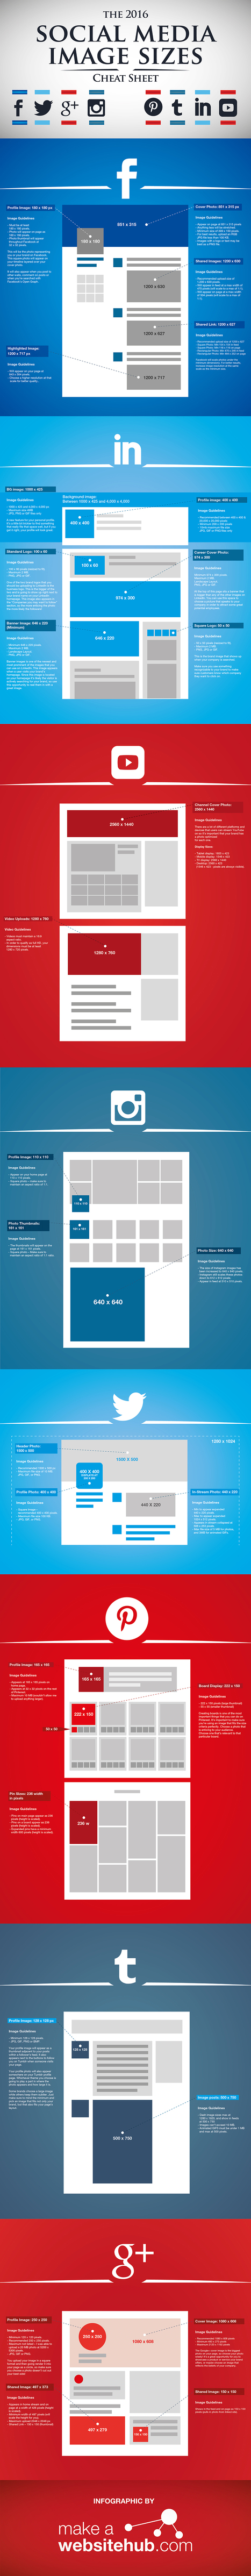 2016 Social Media Image Sizes Cheat Sheet | Infographic | Social Media and its influence | Scoop.it